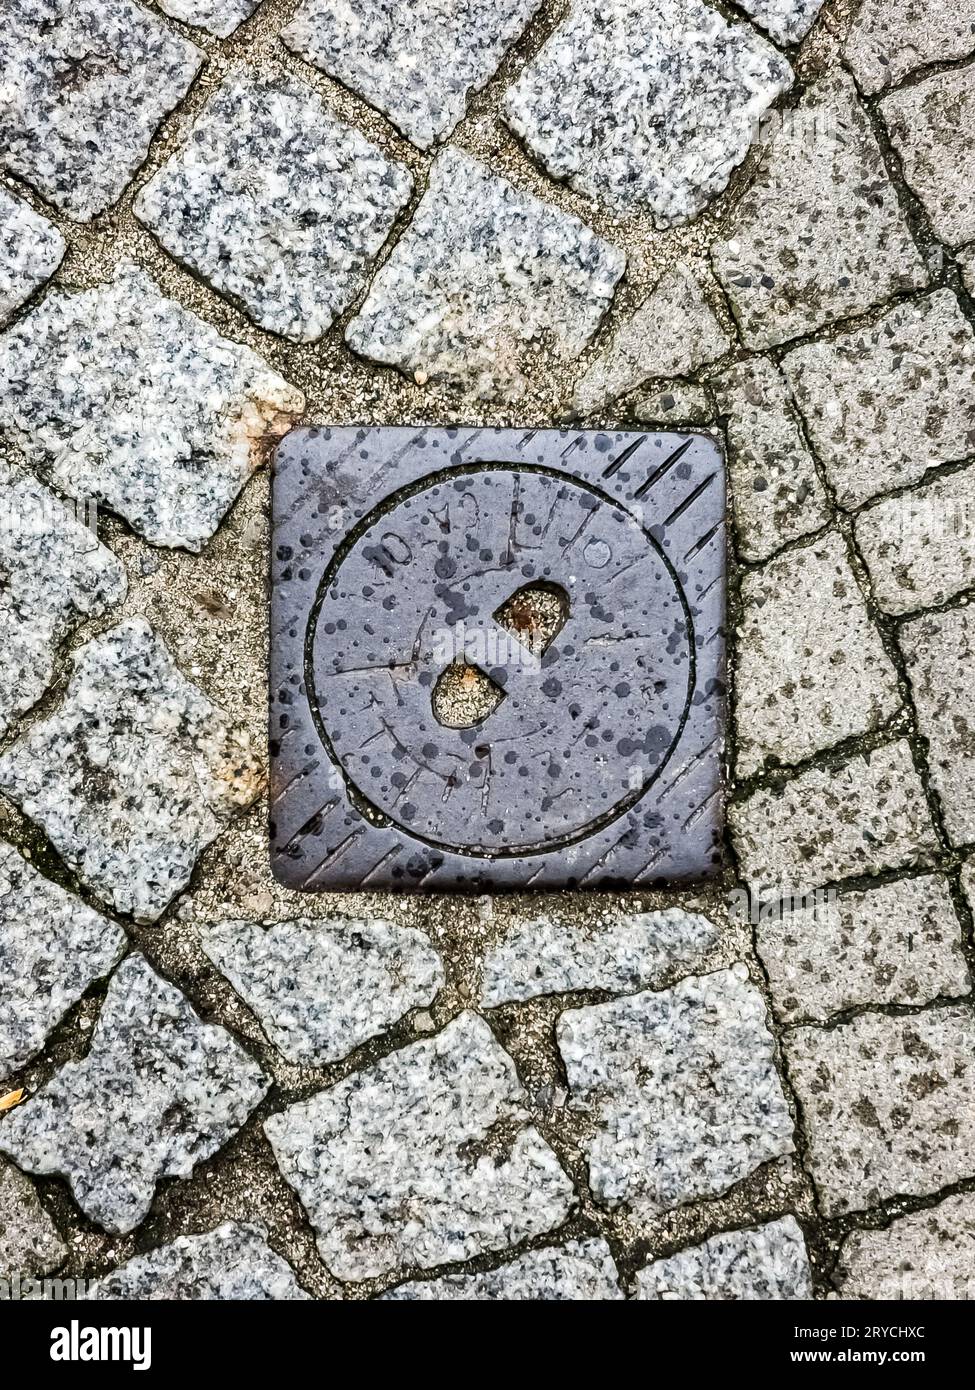 Manhole cover of the gas pipeline system. A massive metal hatch for access to city communications in the pavement. Stock Photo